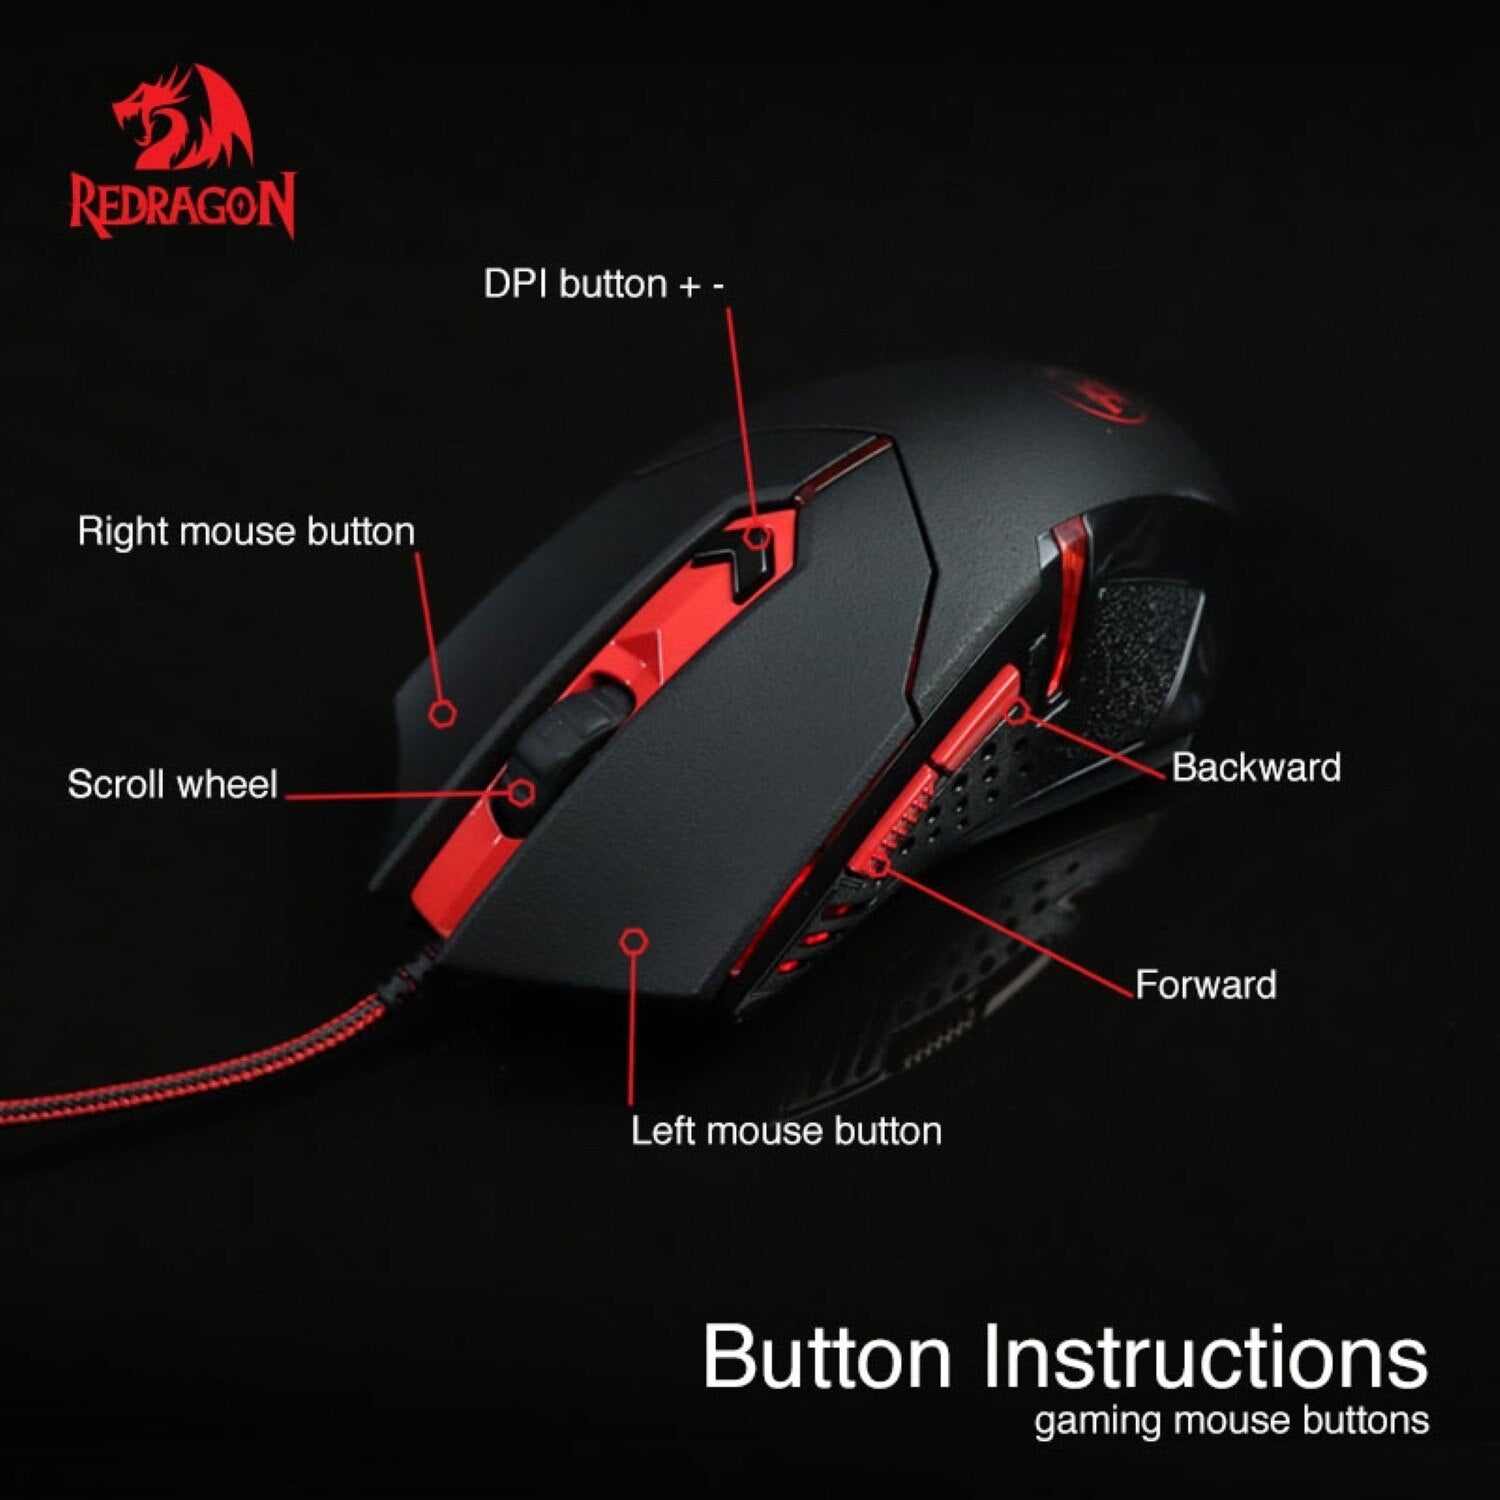 Redragon M601-3 CENTROPHORUS 3200 DPI Gaming Mouse - Brother-mart